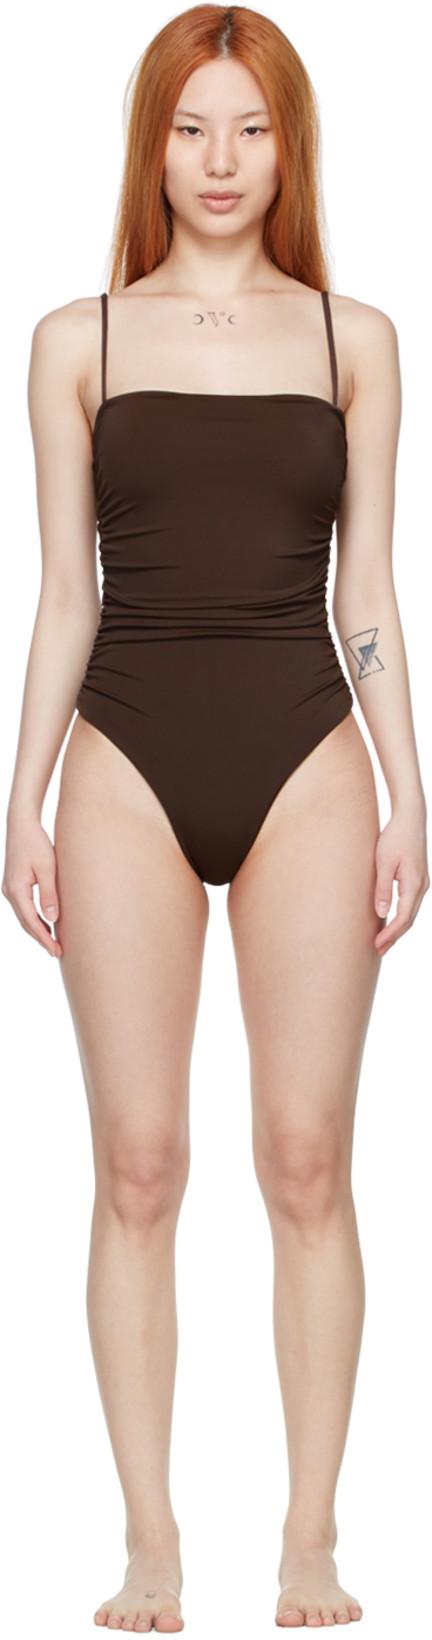 SSENSE Exclusive Brown Recycled Nylon One-Piece Swimsuit by BELLE THE LABEL